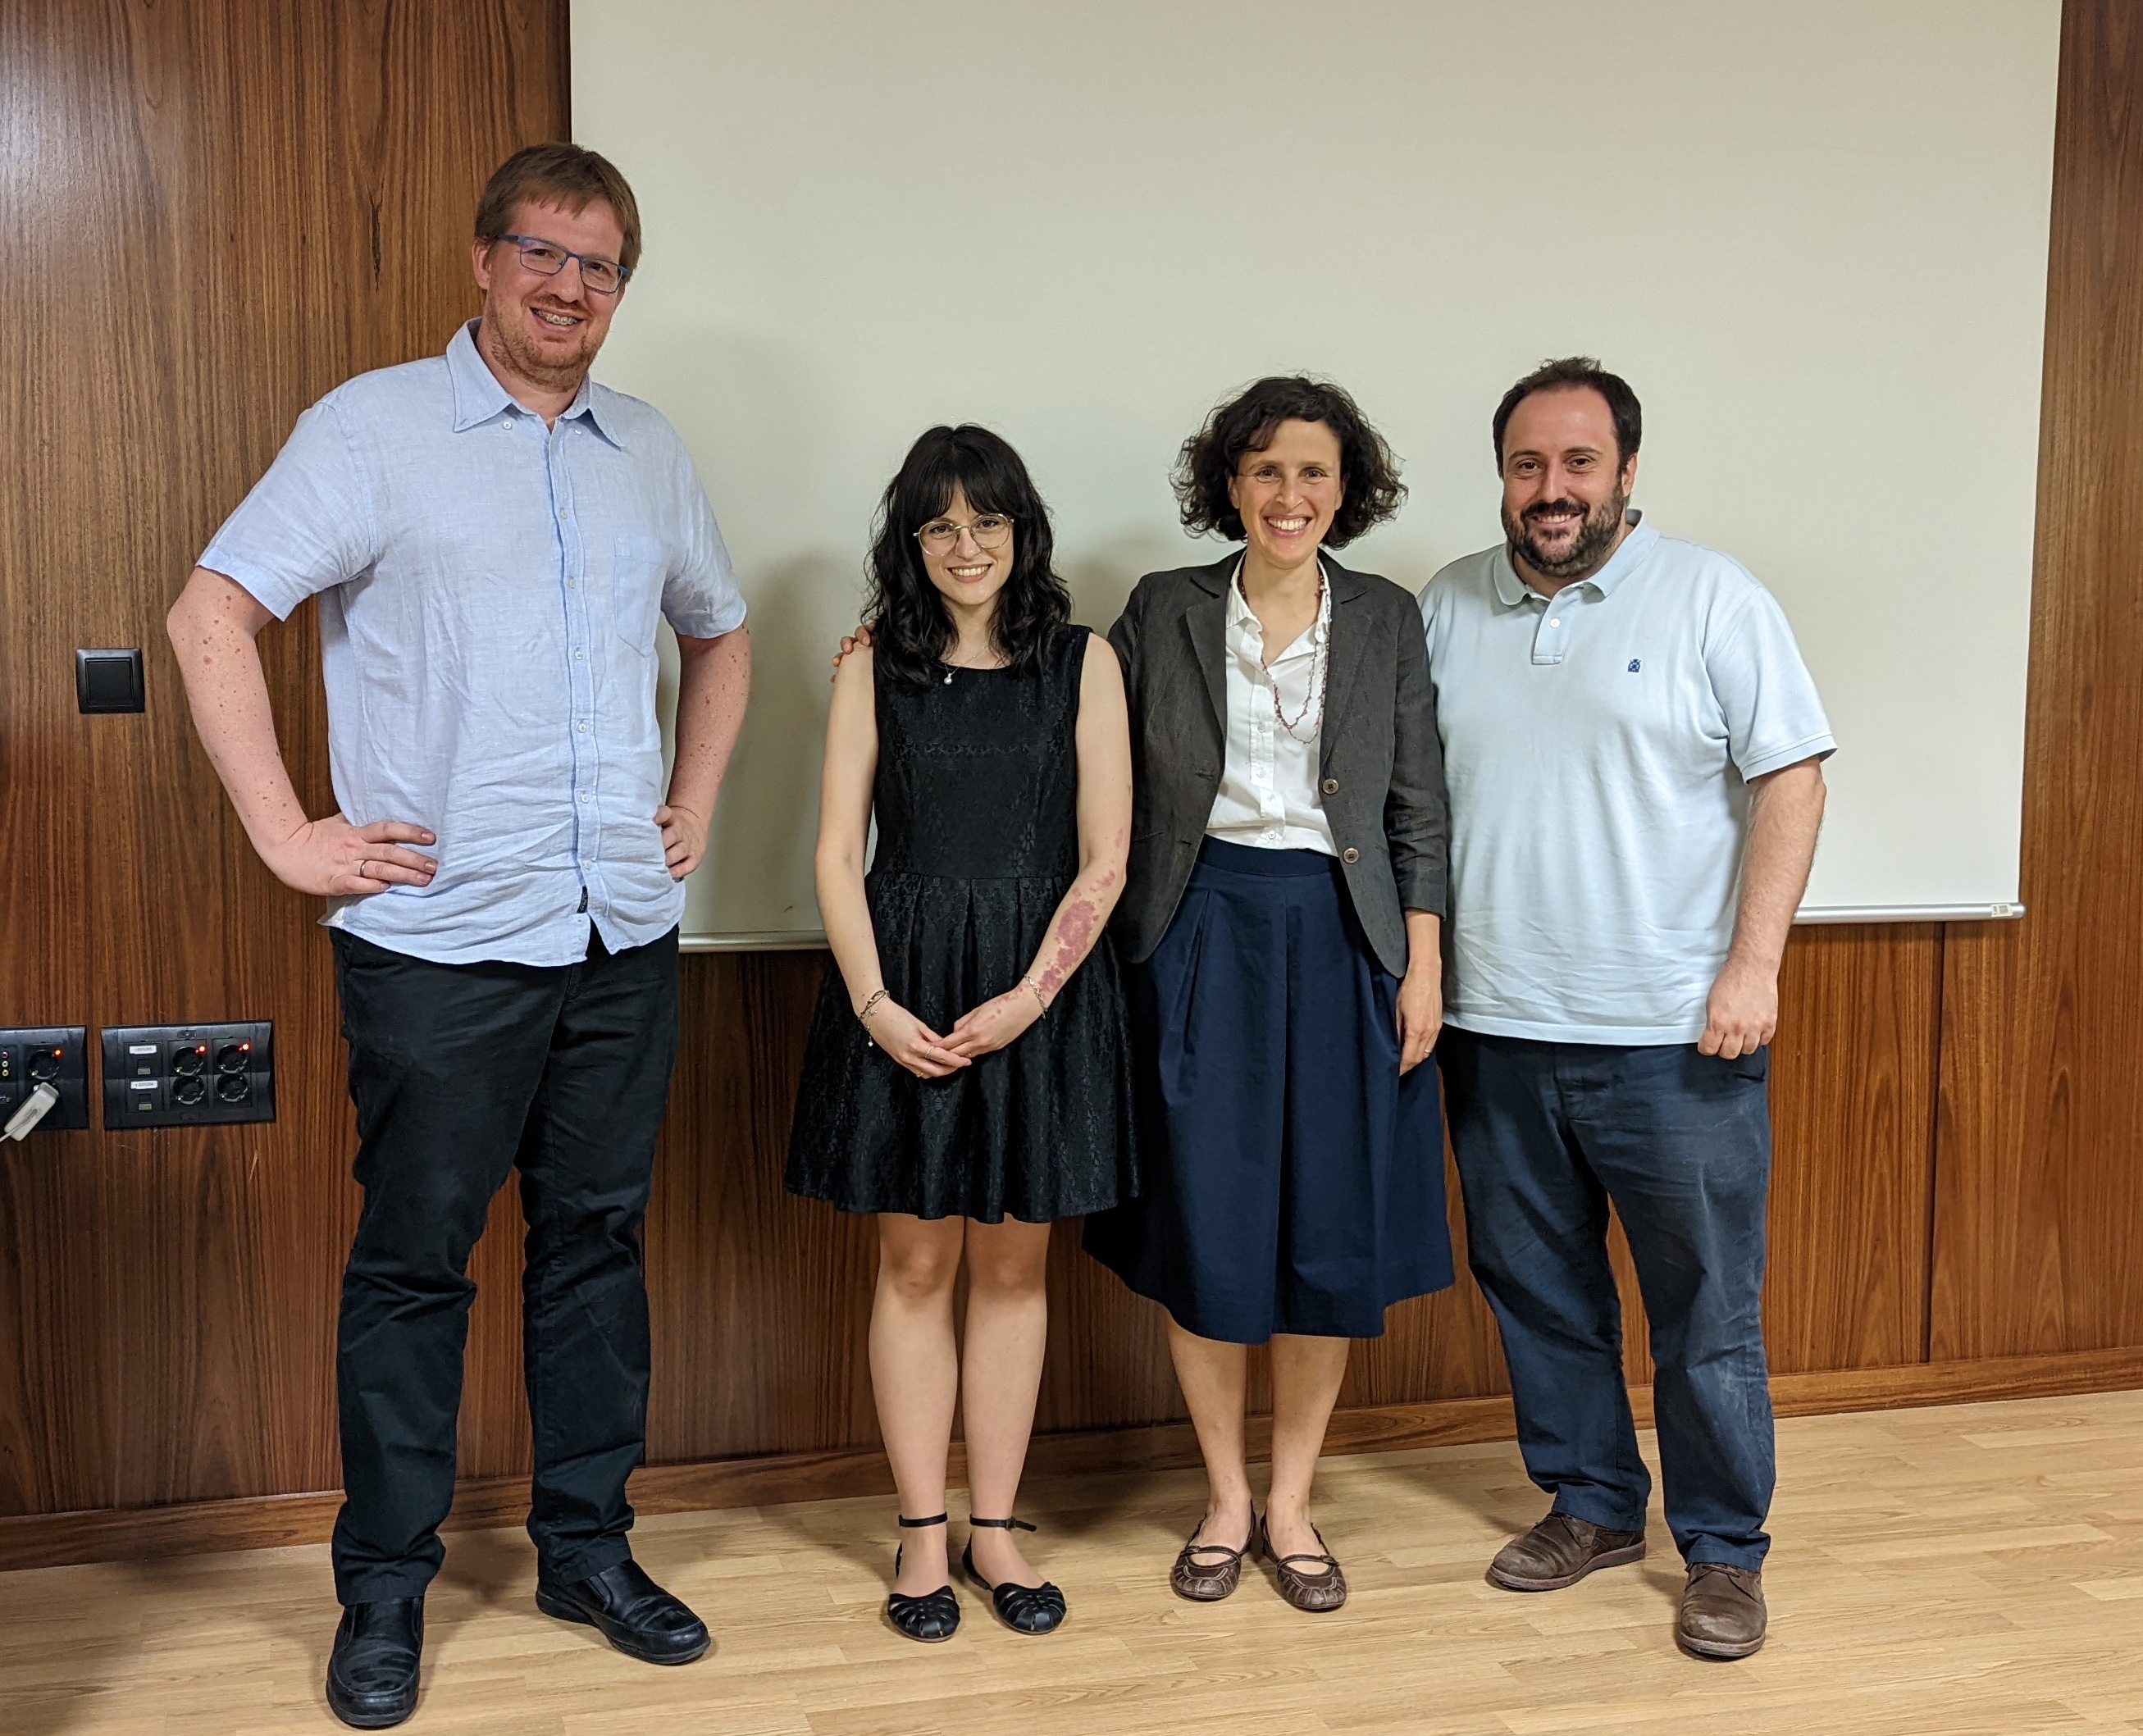 After the thesis
presentation, with her proud advisor and the in-person committee members:
Francesca Marchetti and Antonio Fernández Domínguez.